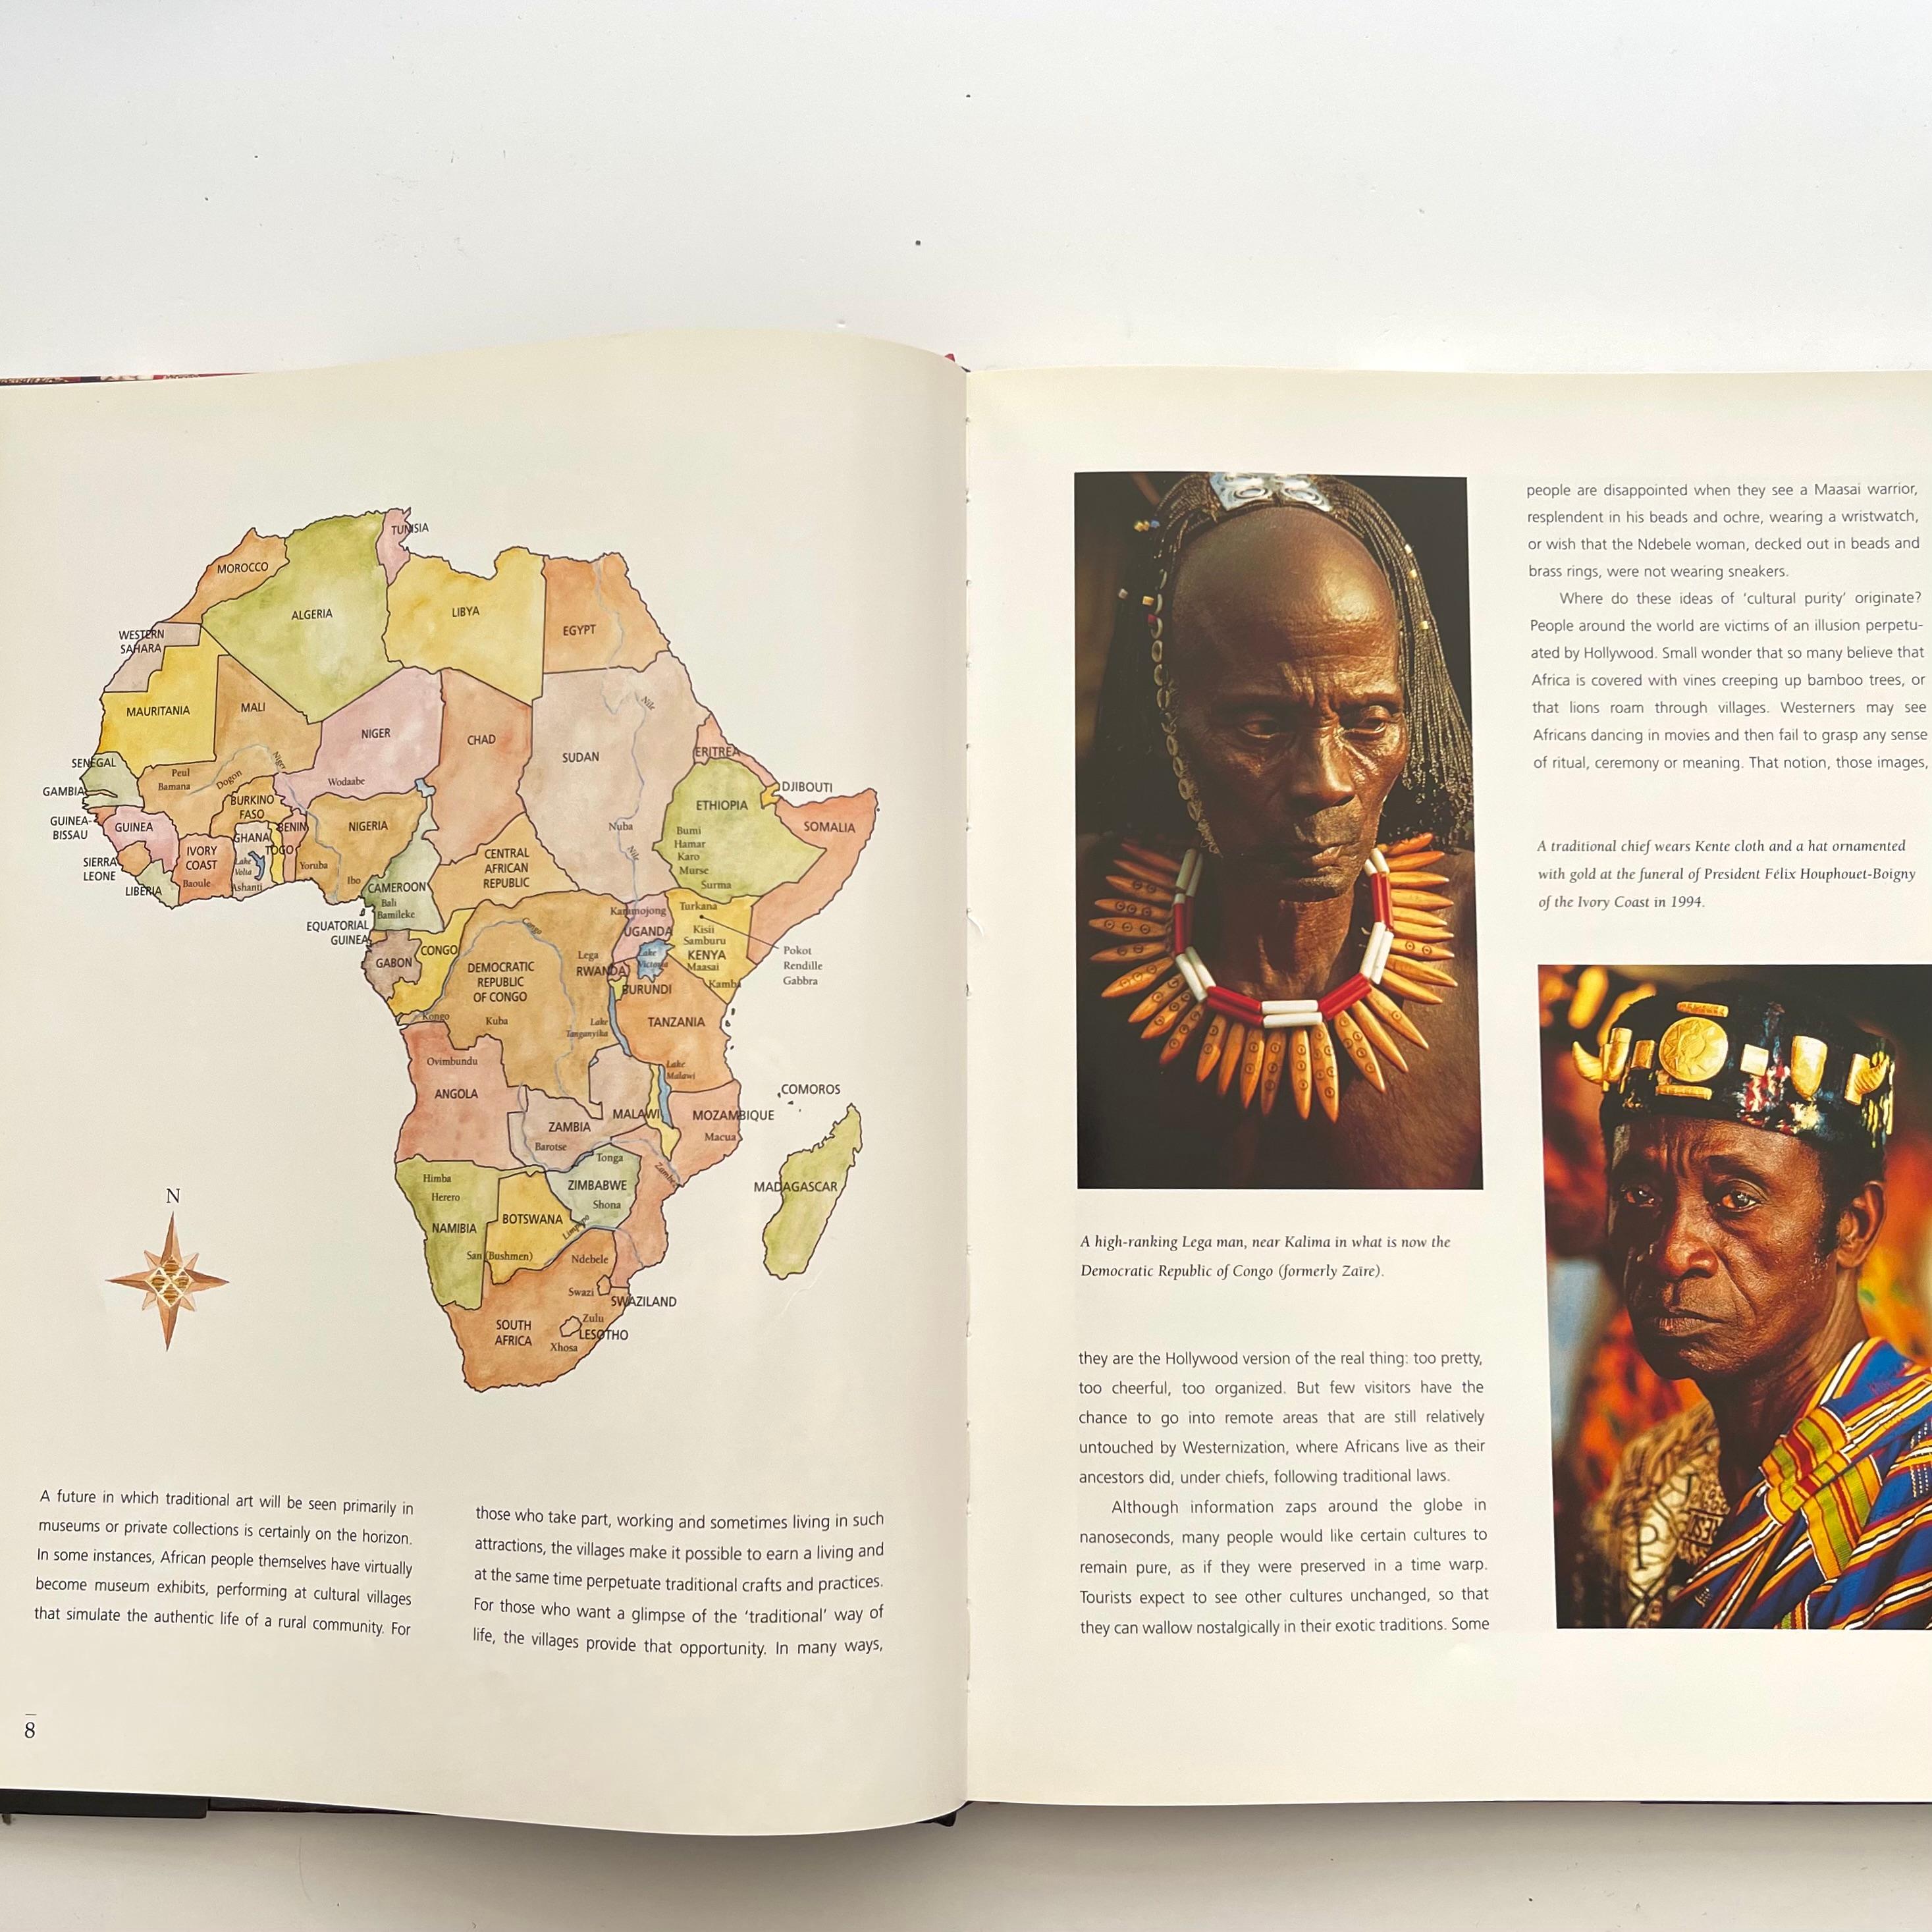 Published by Nedbank 1st edition 1999 English text

A lavishly illustrated volume exploring Africa's rich traditions of crafts and decorative arts. Focusing on the people of sub-Saharan Africa who have created a sophisticated and rich heritage of